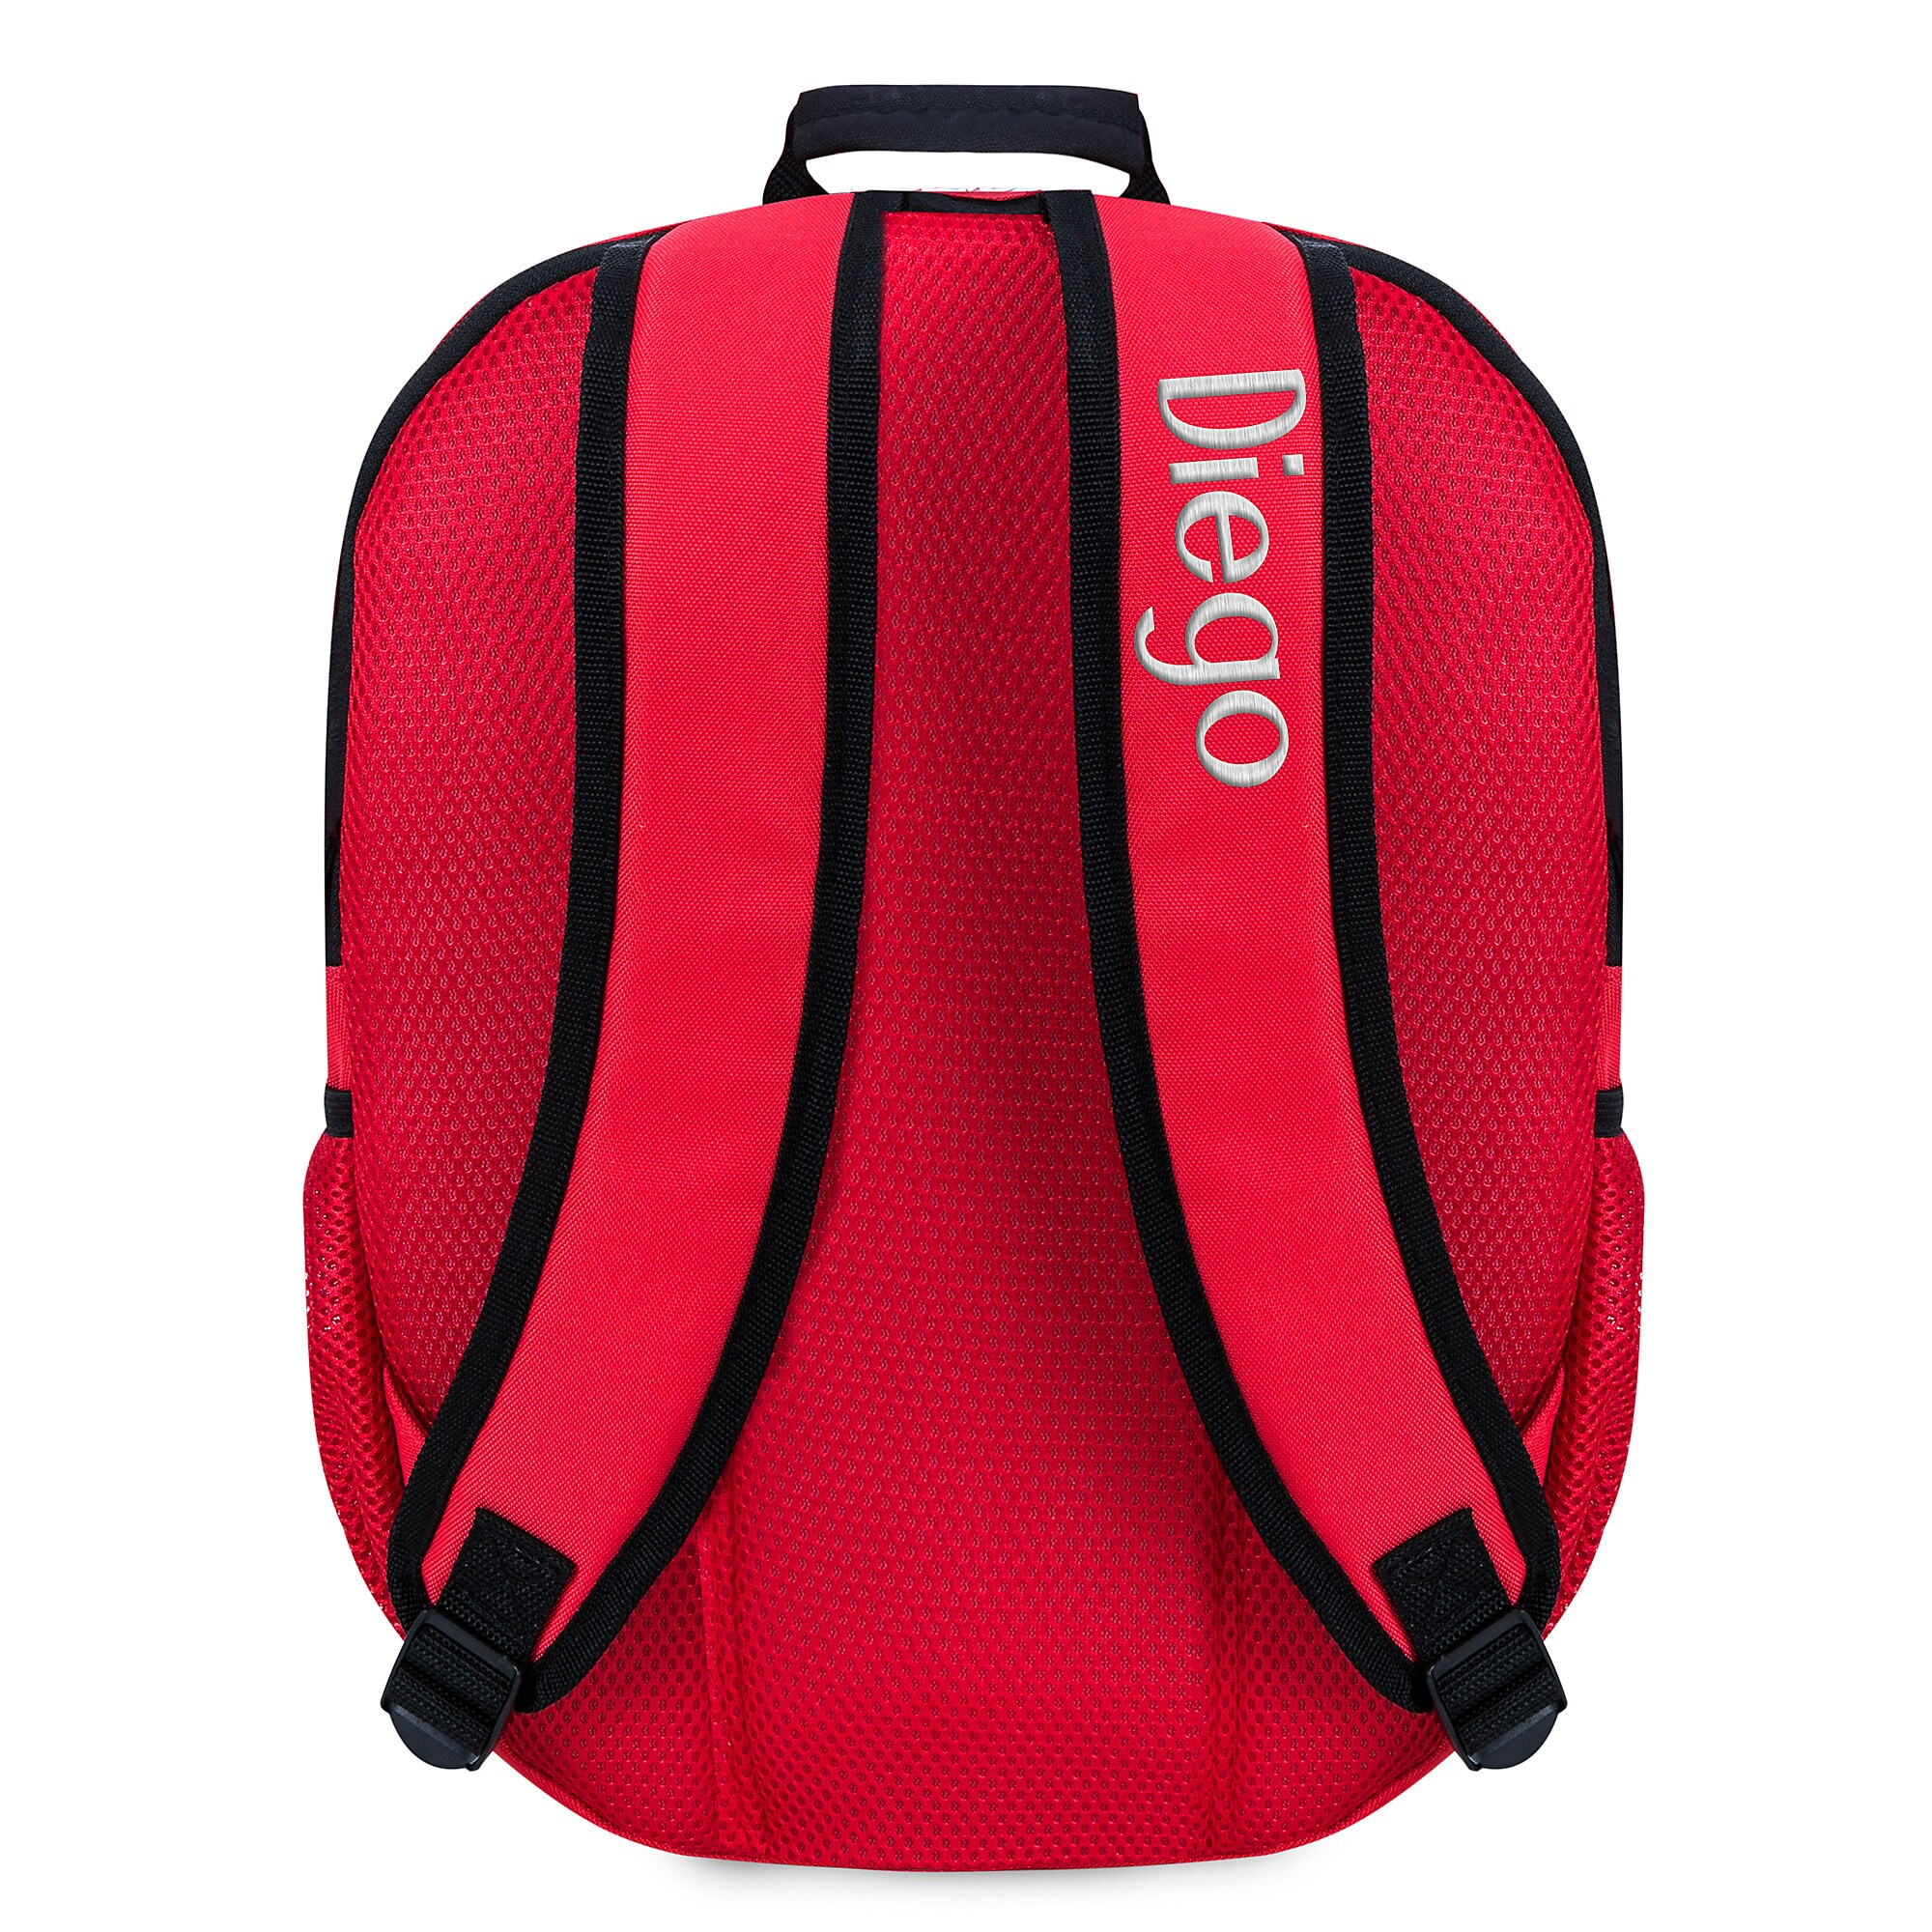 Spider-Man Backpack - Personalized